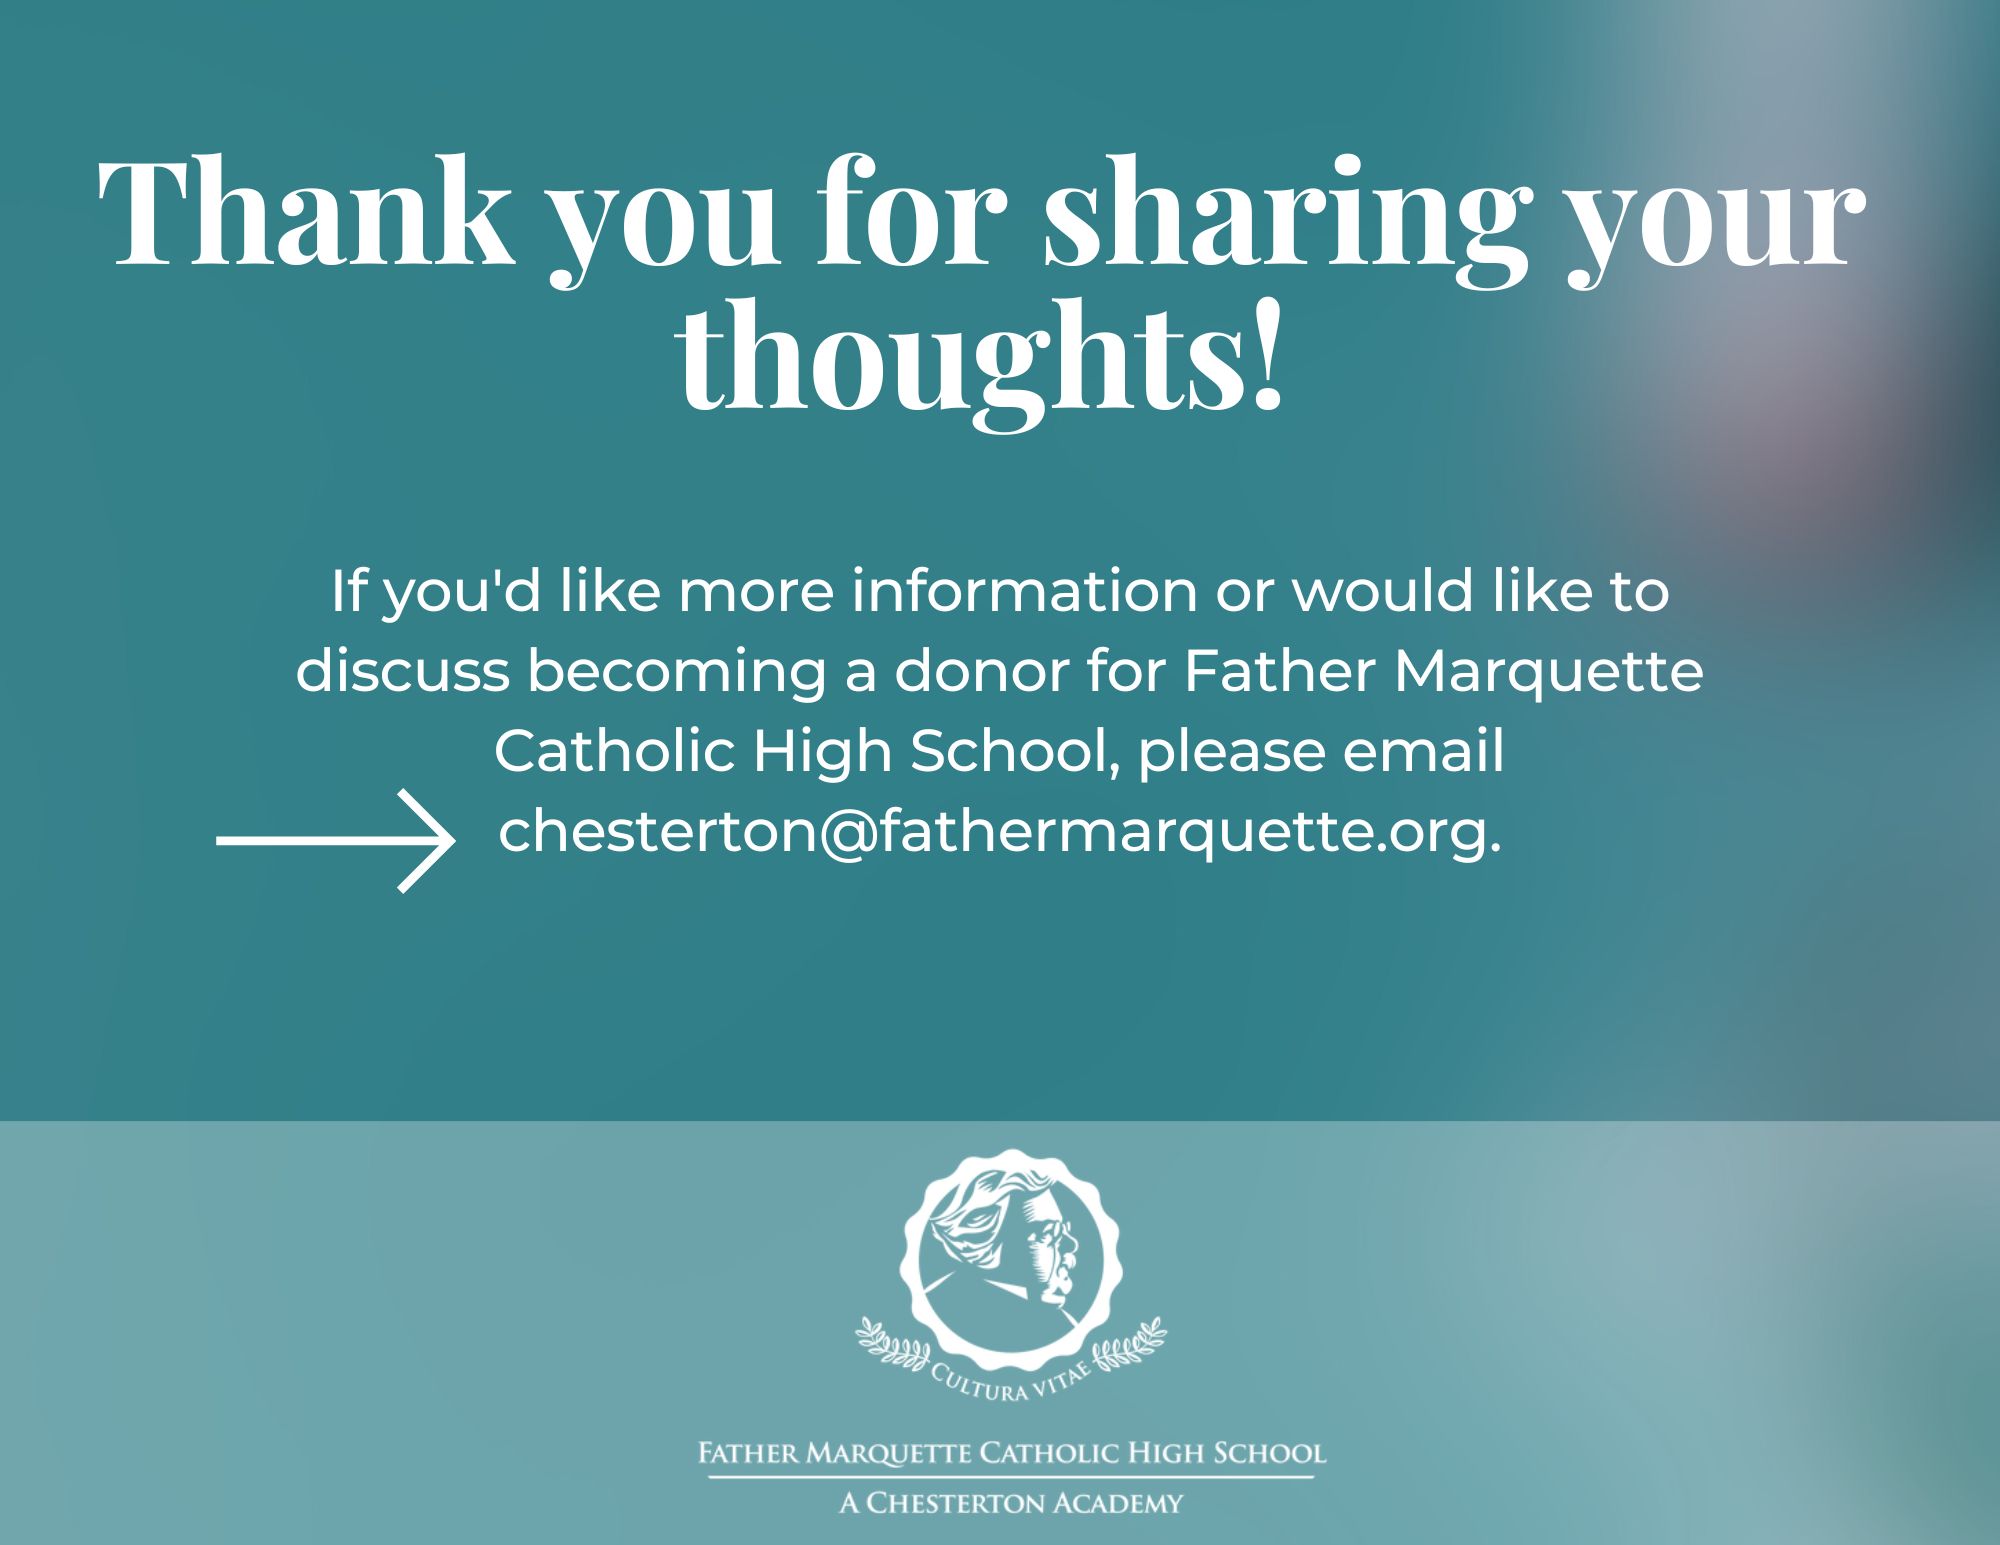 Thank you for sharing your
thoughts! If you'd like more information or would like to discuss becoming a donor for Father Marquette Catholic High School, please email chesterton@fathermarquette.org.